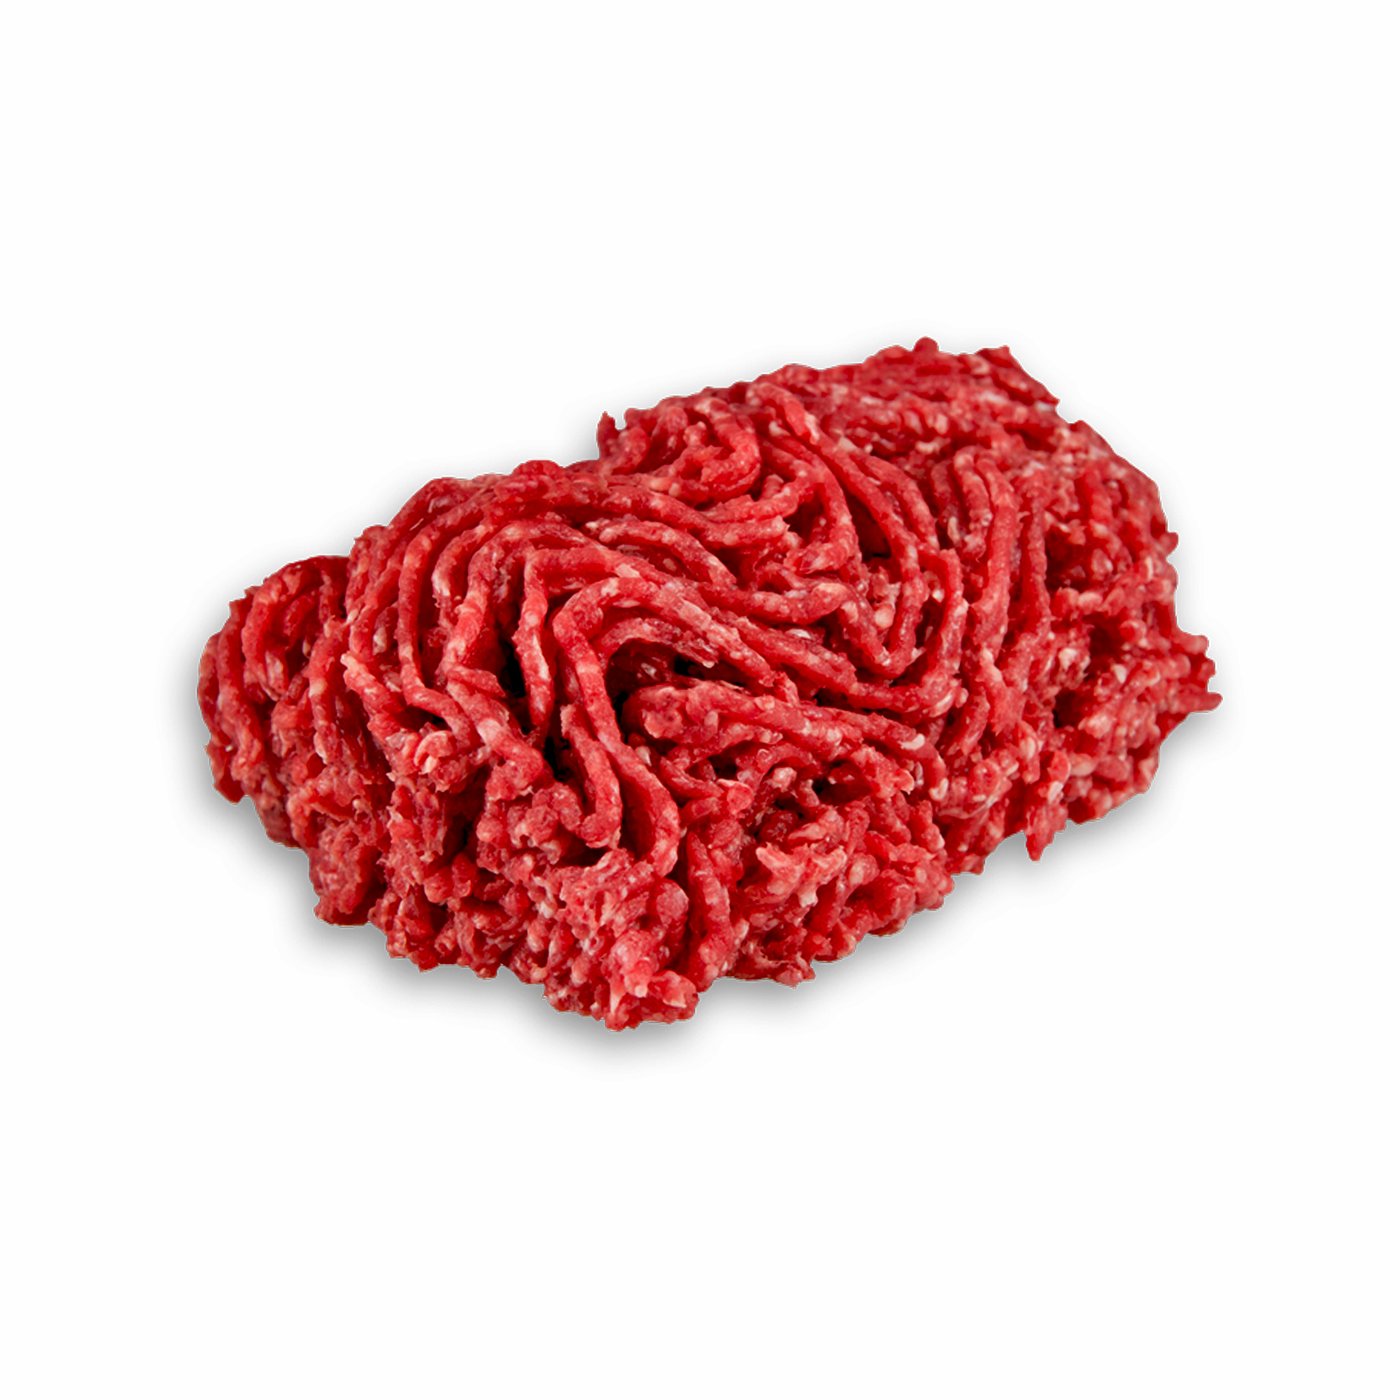 The meats that freeze best are the ones with the most fat. Ground meat has a lot of fat and therefore is not compromised after being at a lower temperature.